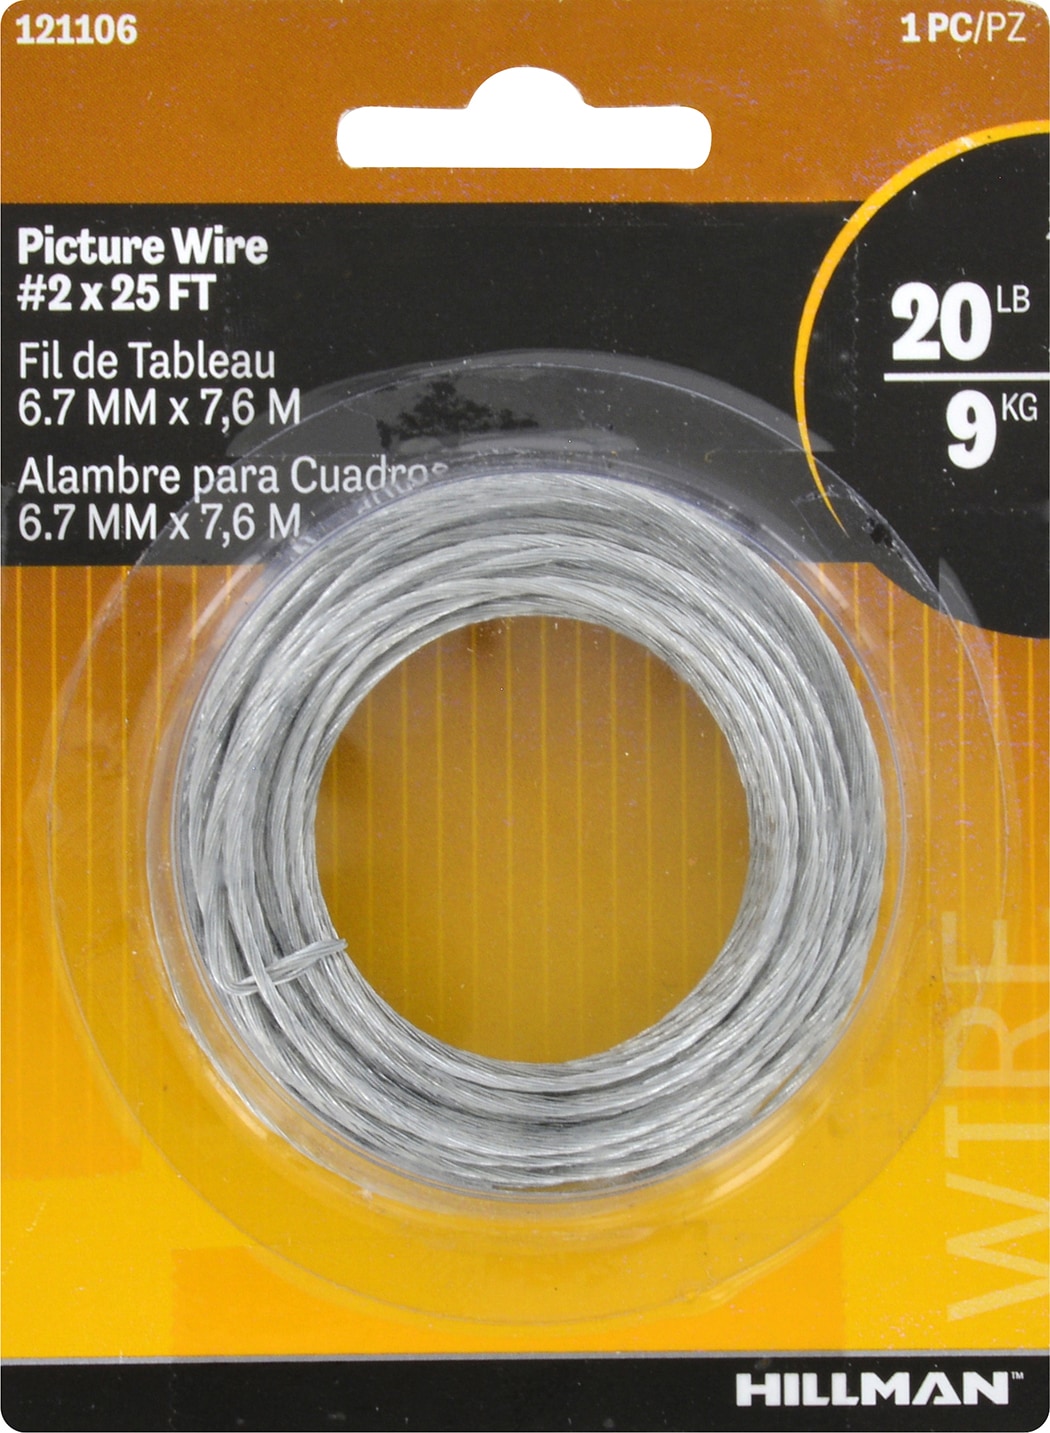 Project Source 14-Gauge Steel Picture Hanging Wire in the Picture